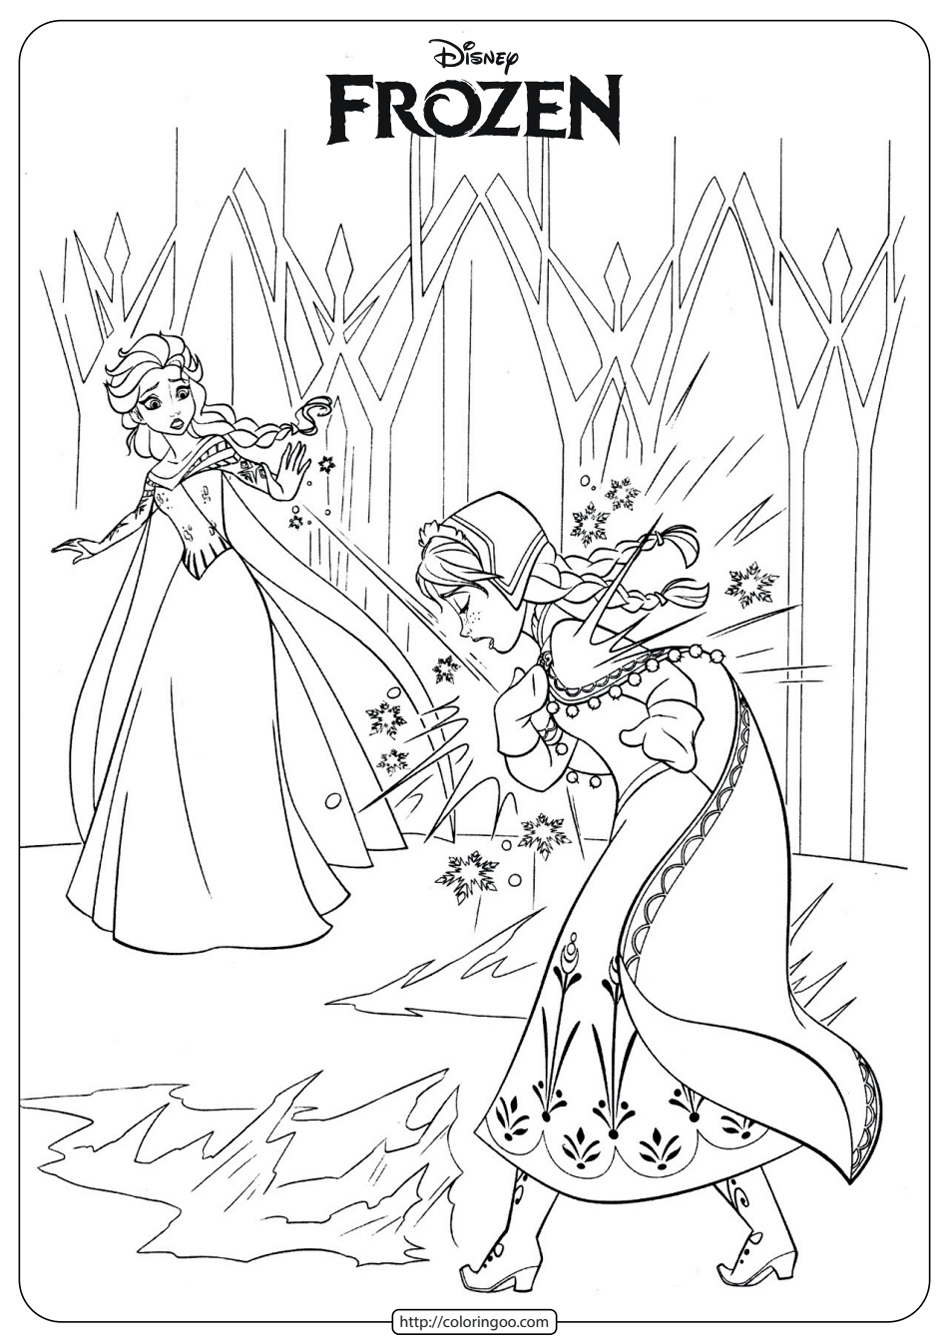 Printable Frozen Elsa and Anna Coloring Page